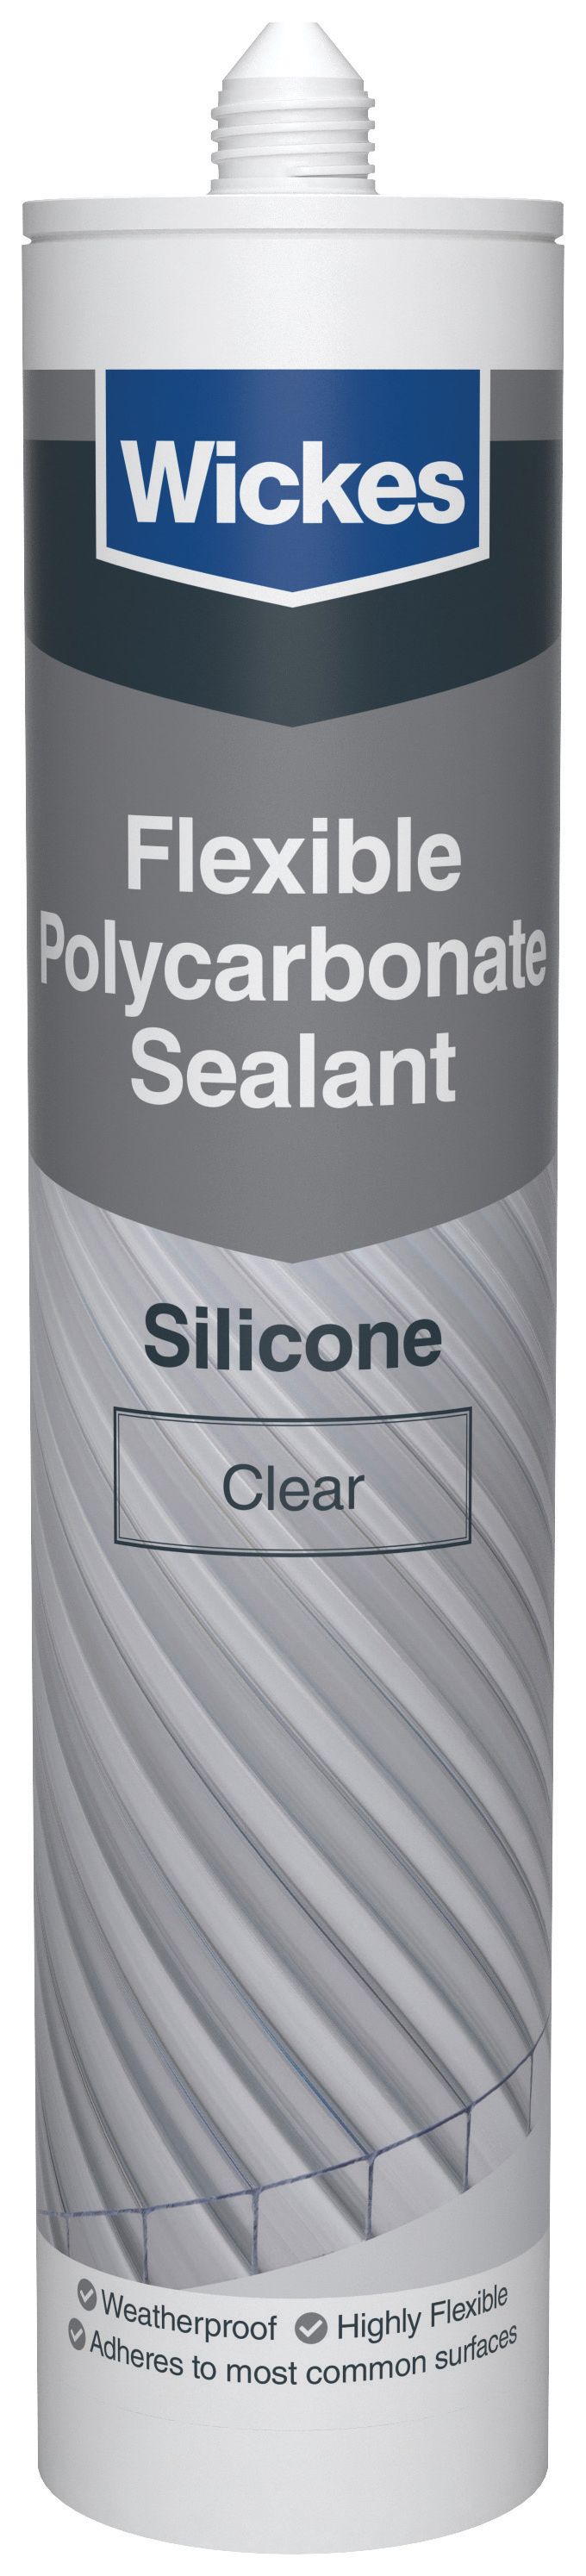 Image of Wickes Flexible Polycarbonate Sealant Clear 300ml